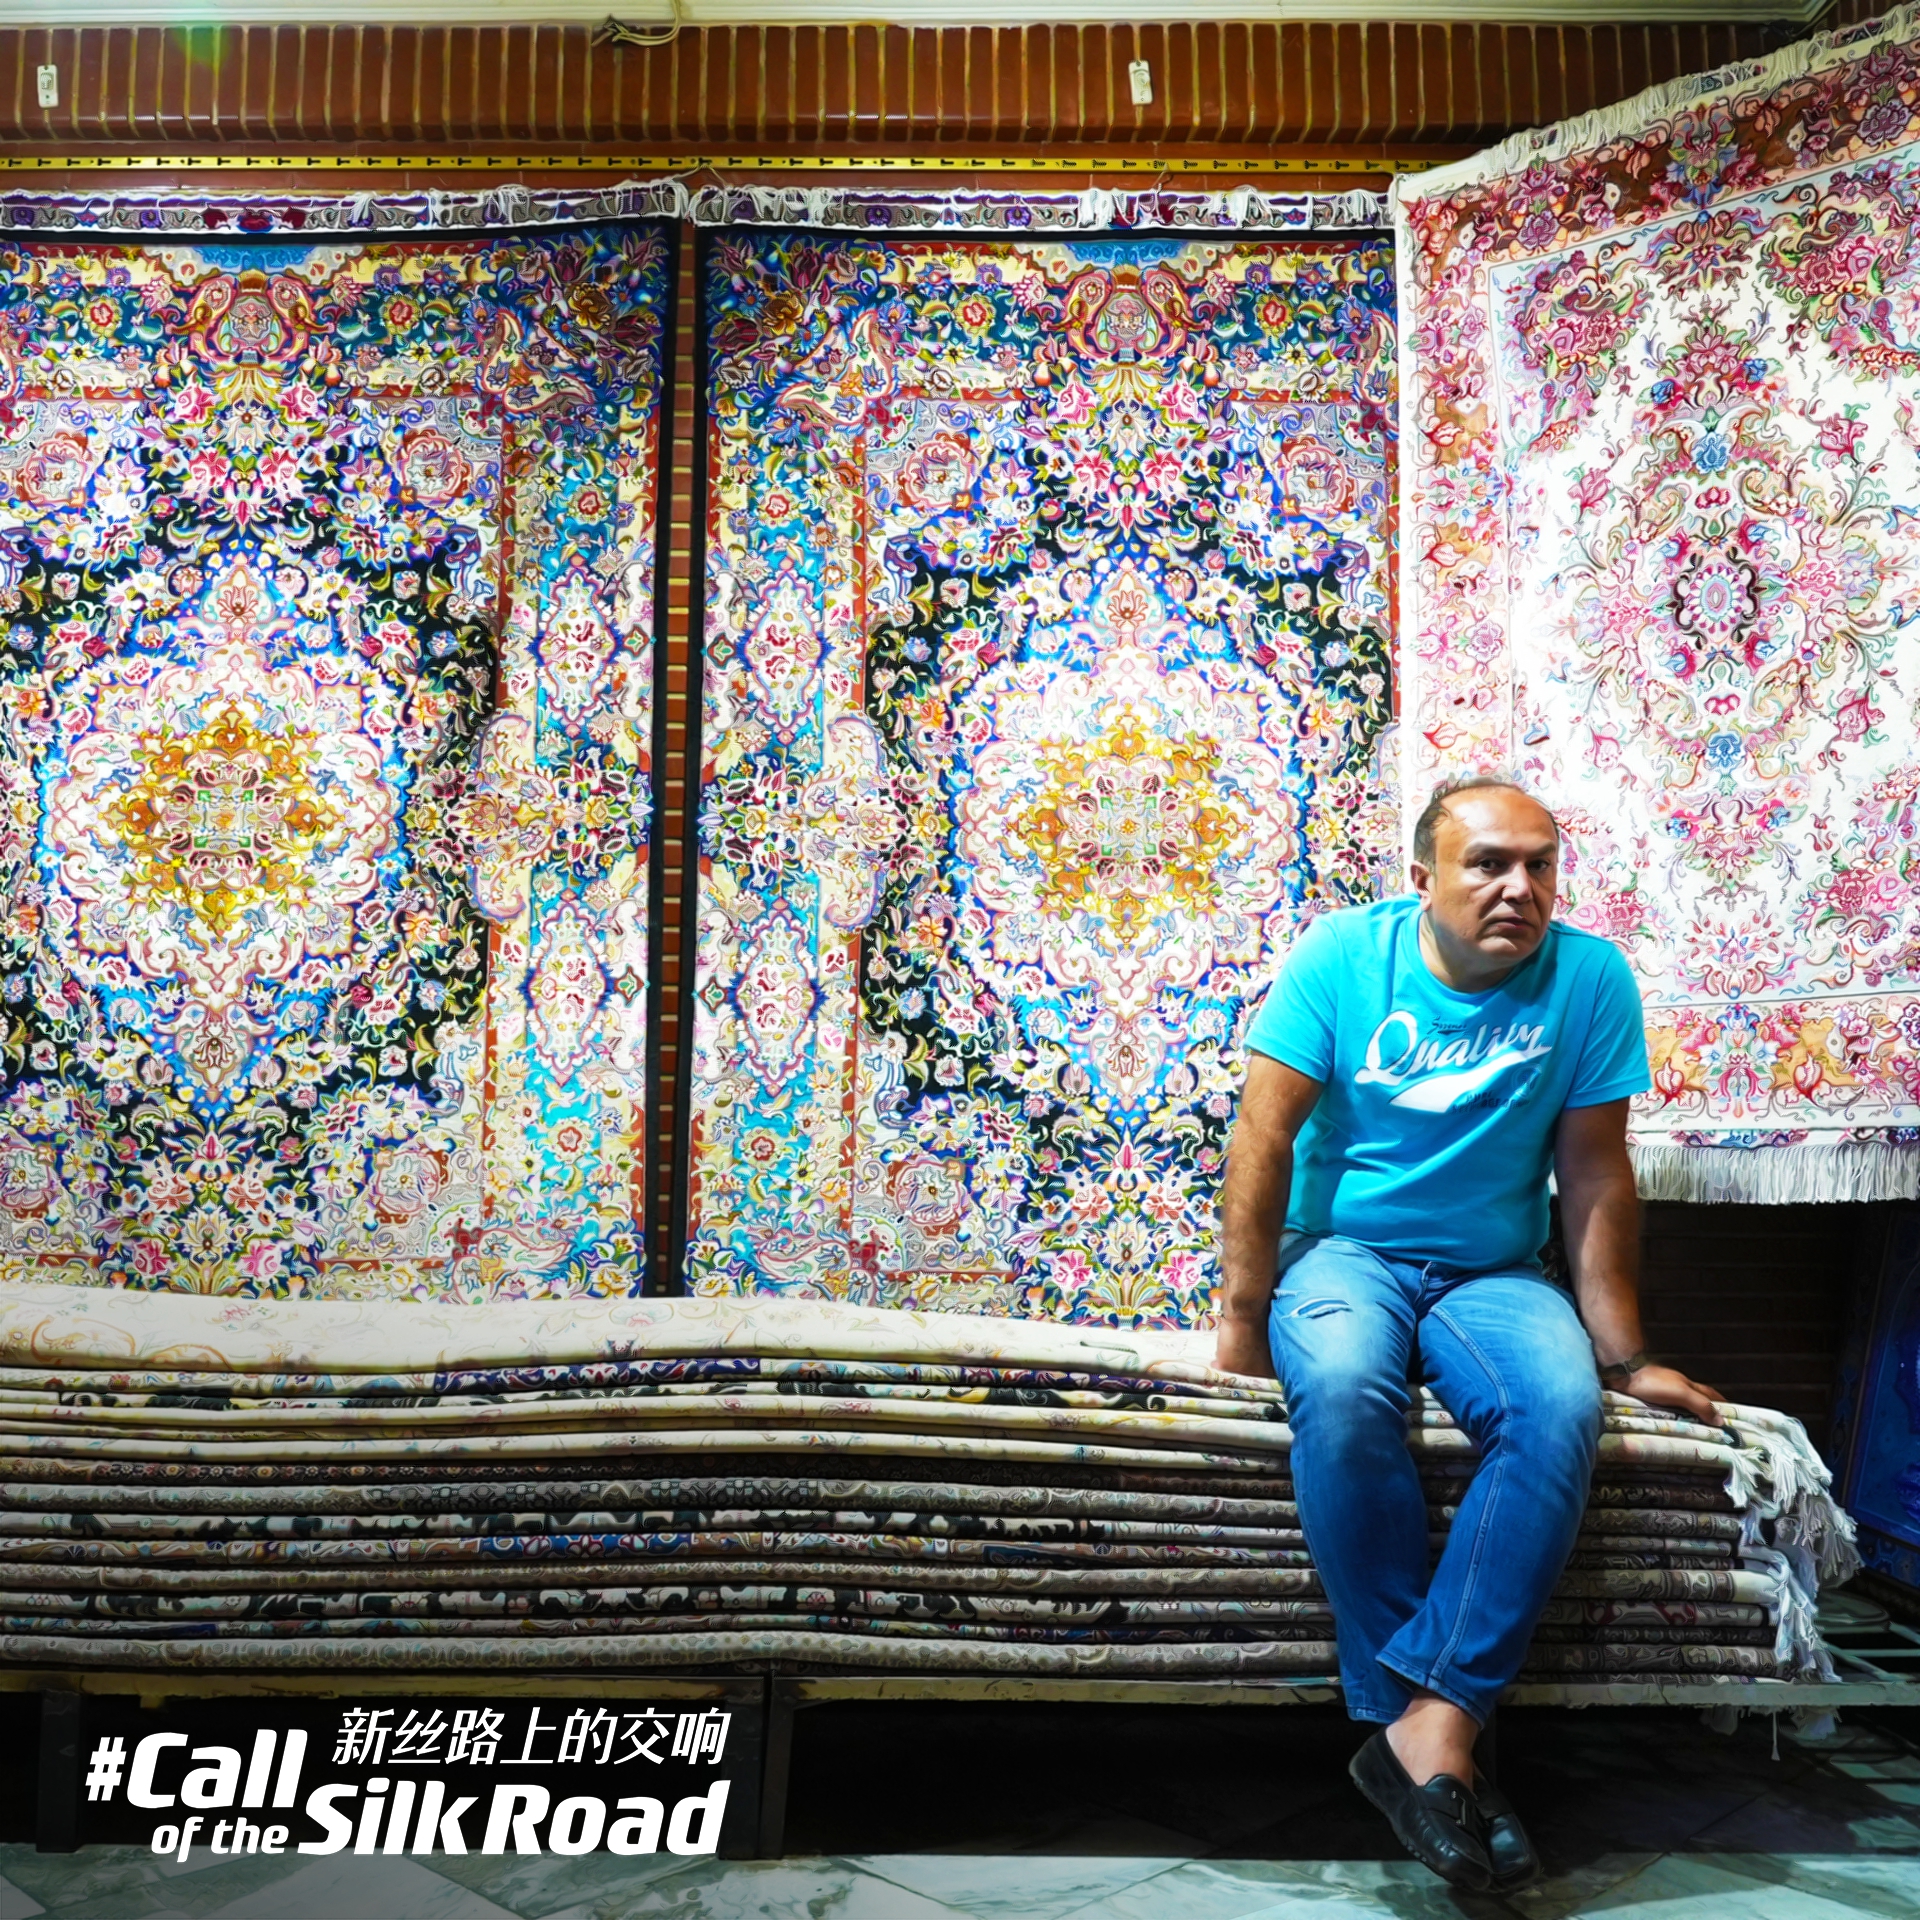 A view of the hand-made Persian carpets at a bazaar in Tehran, Iran /CGTN